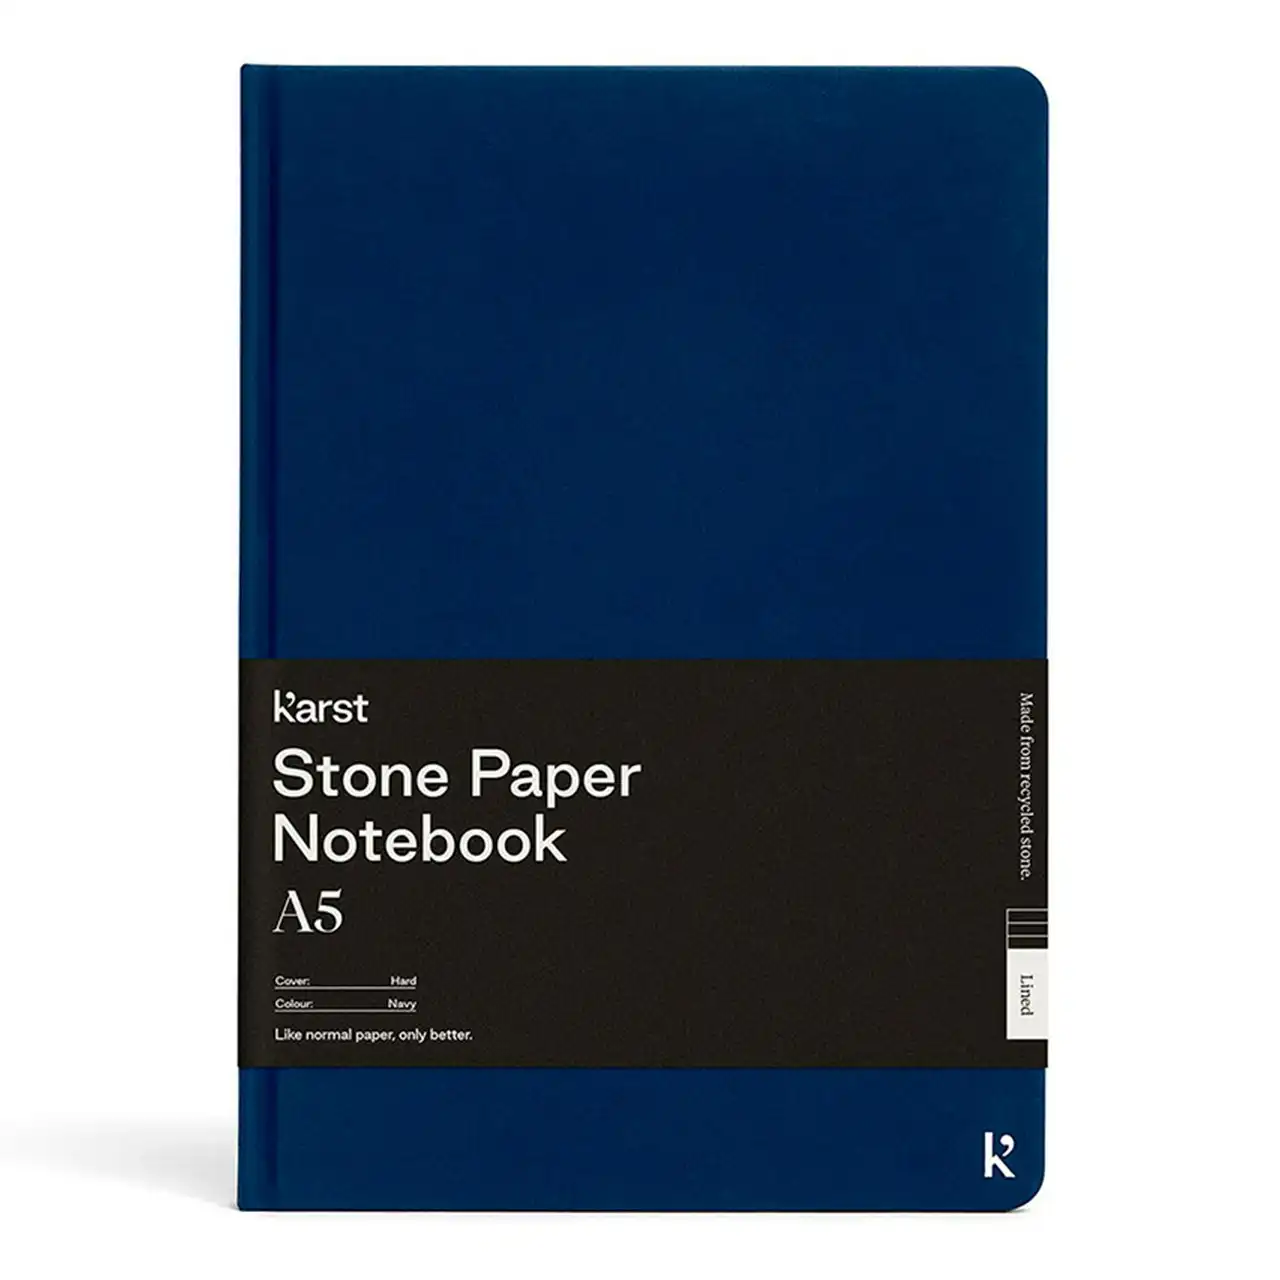 Karst Plain A5 Hard Cover Notebook Writing 100gsm Paper 144 Pages Journal Navy